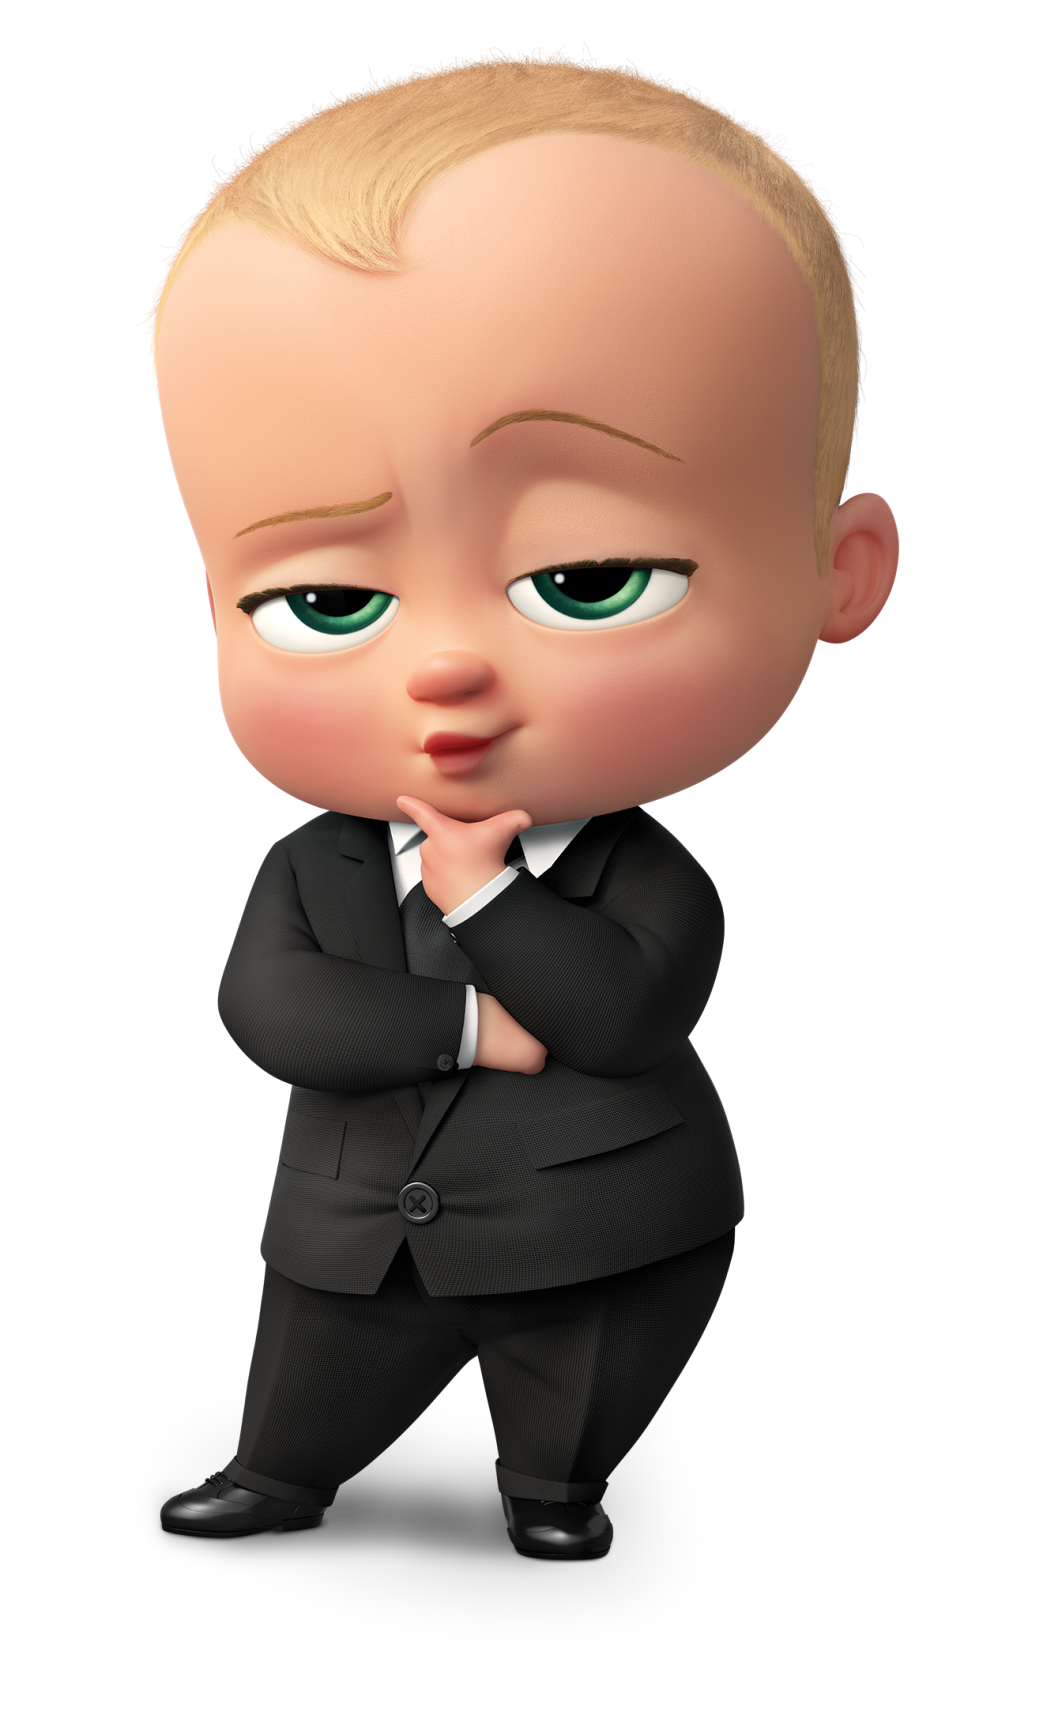 Pin by Tracy Eichenberger on Boss baby in 2020 Boss baby Baby